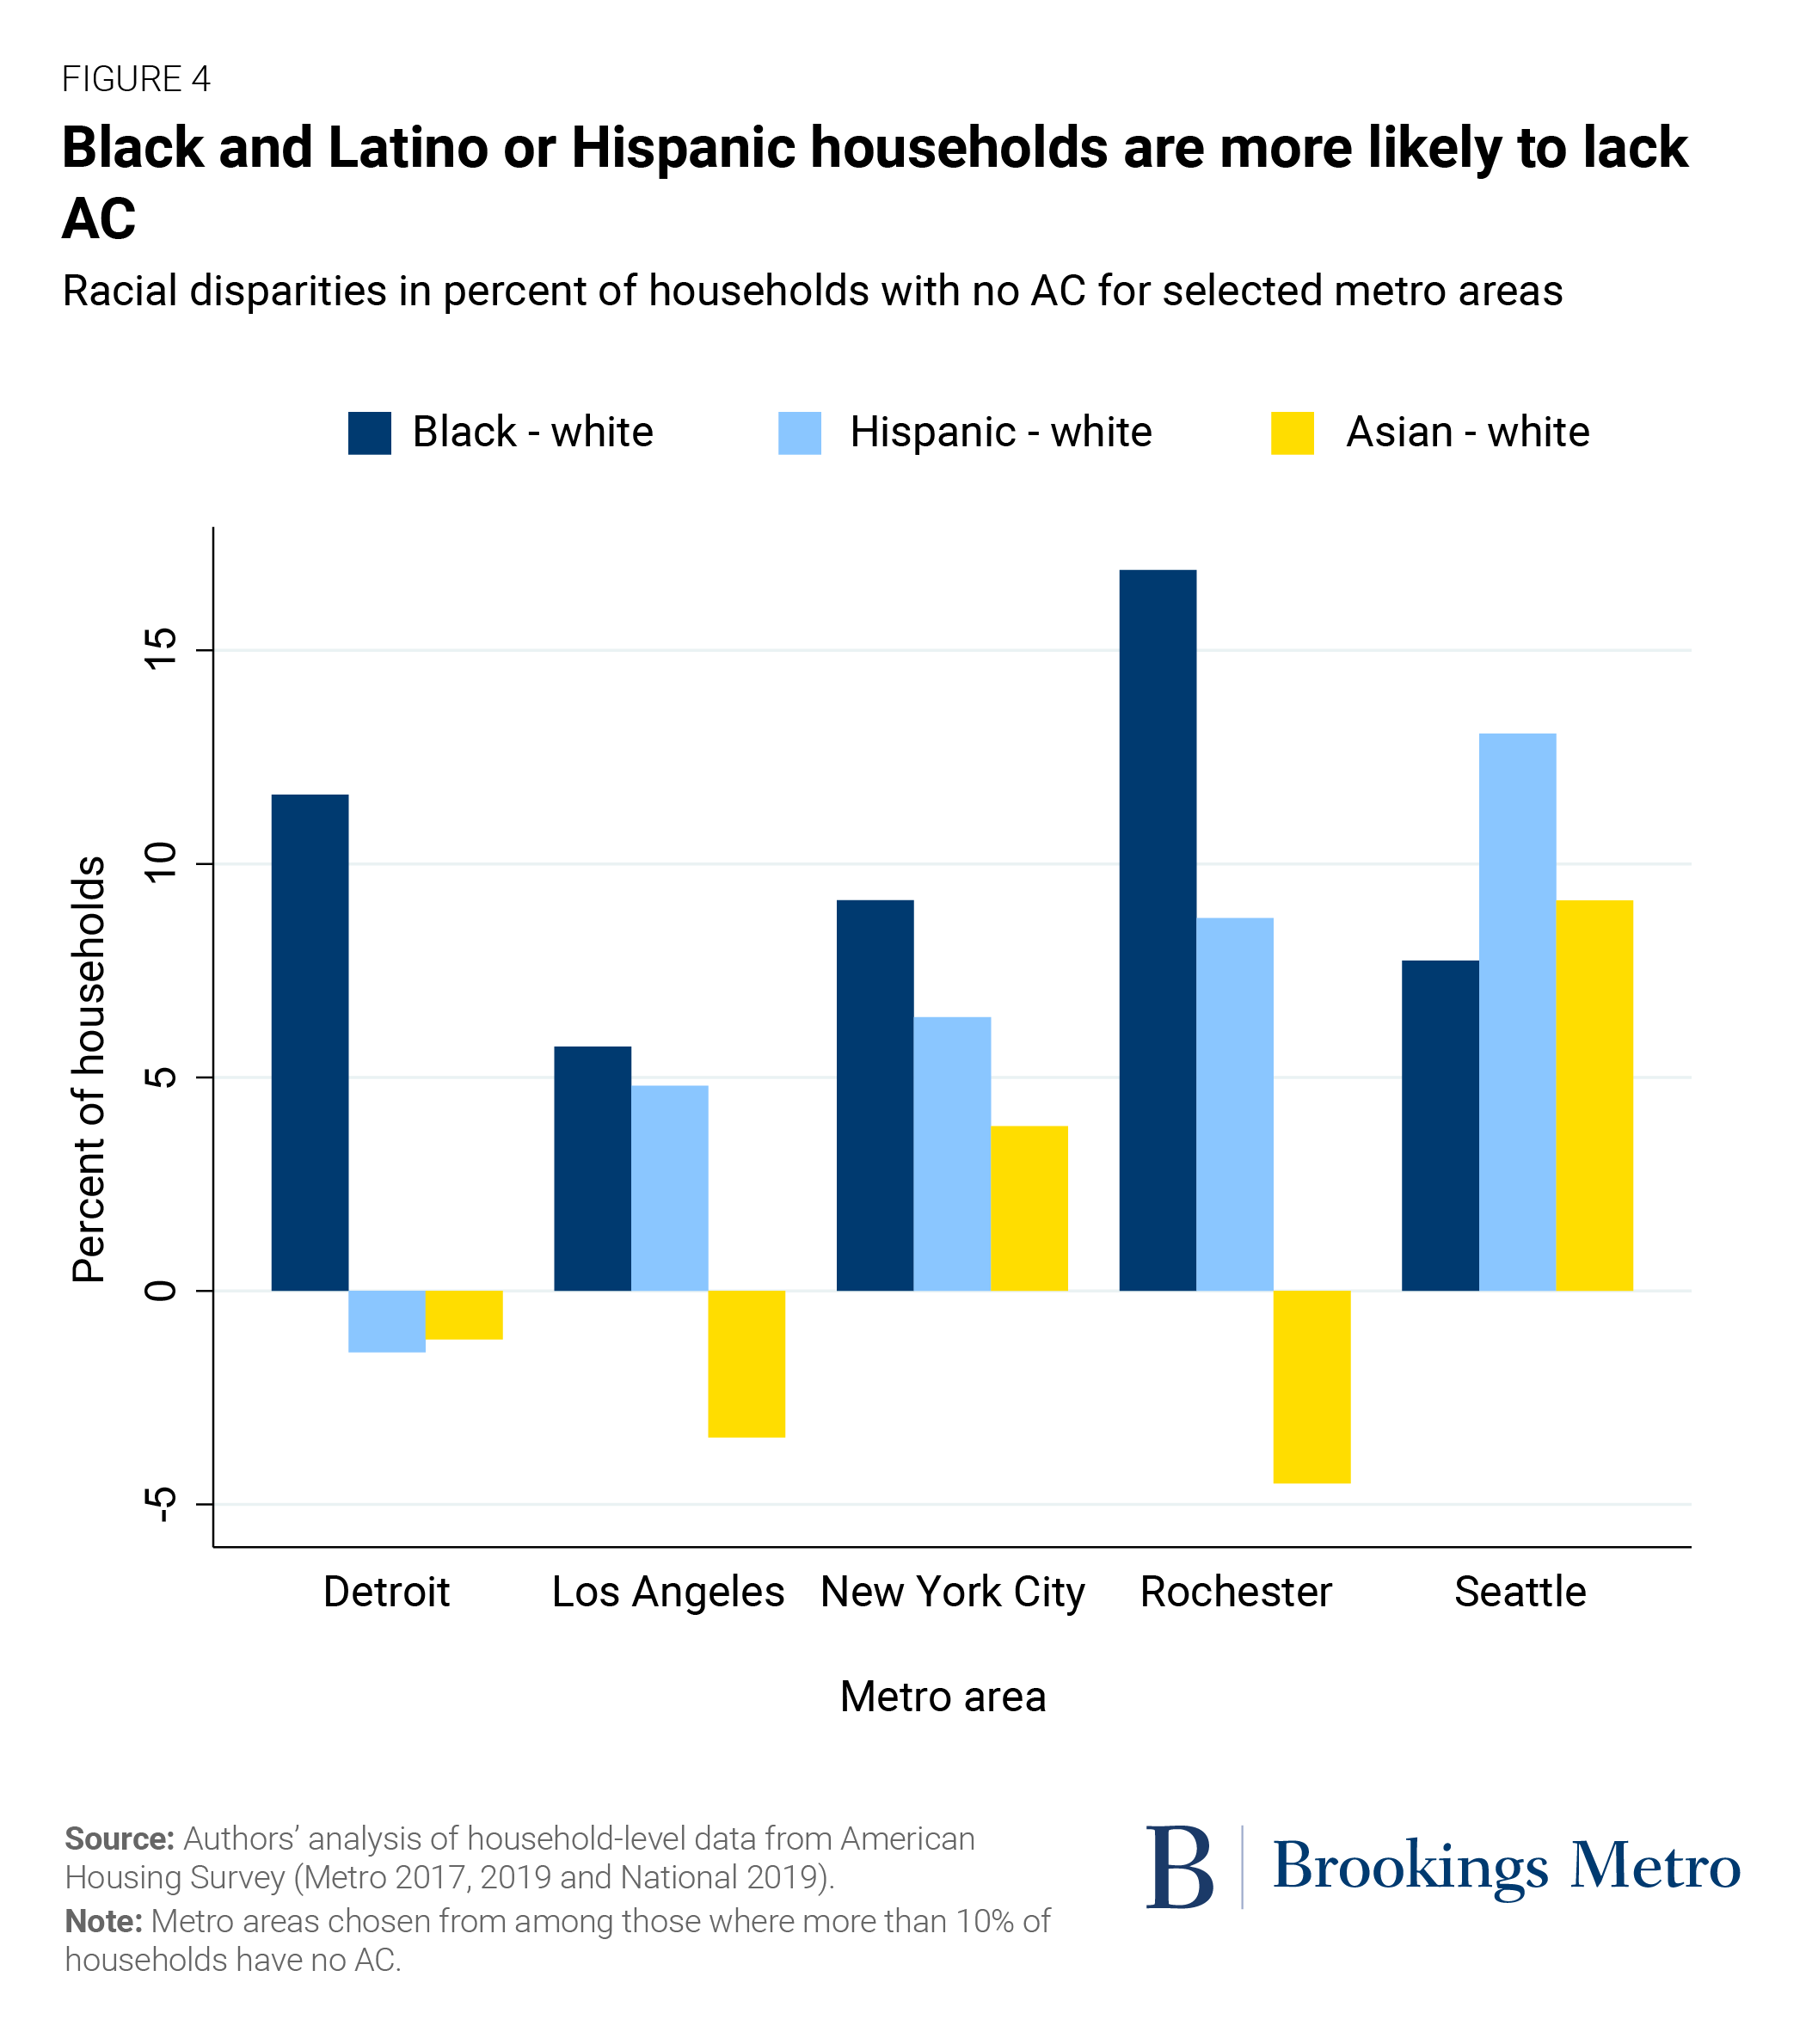 Black and Latino or Hispanic households are more likely to lack AC